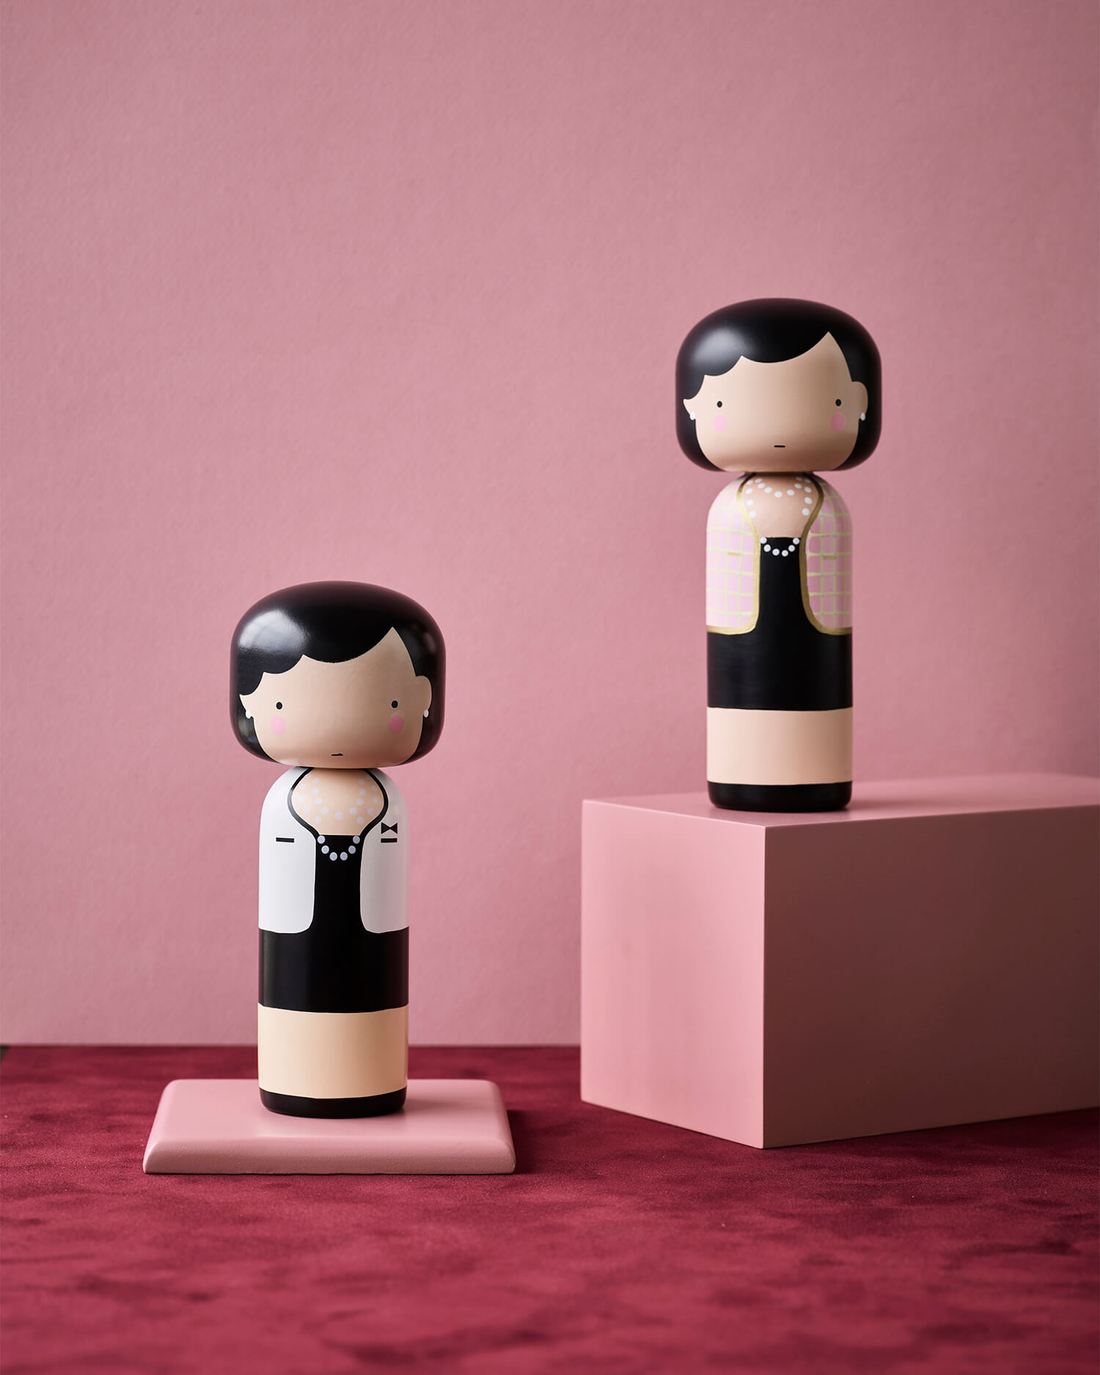 Kokeshi Doll by Sketch.Inc for Lucie Kaas Coco PINK 14.5cm